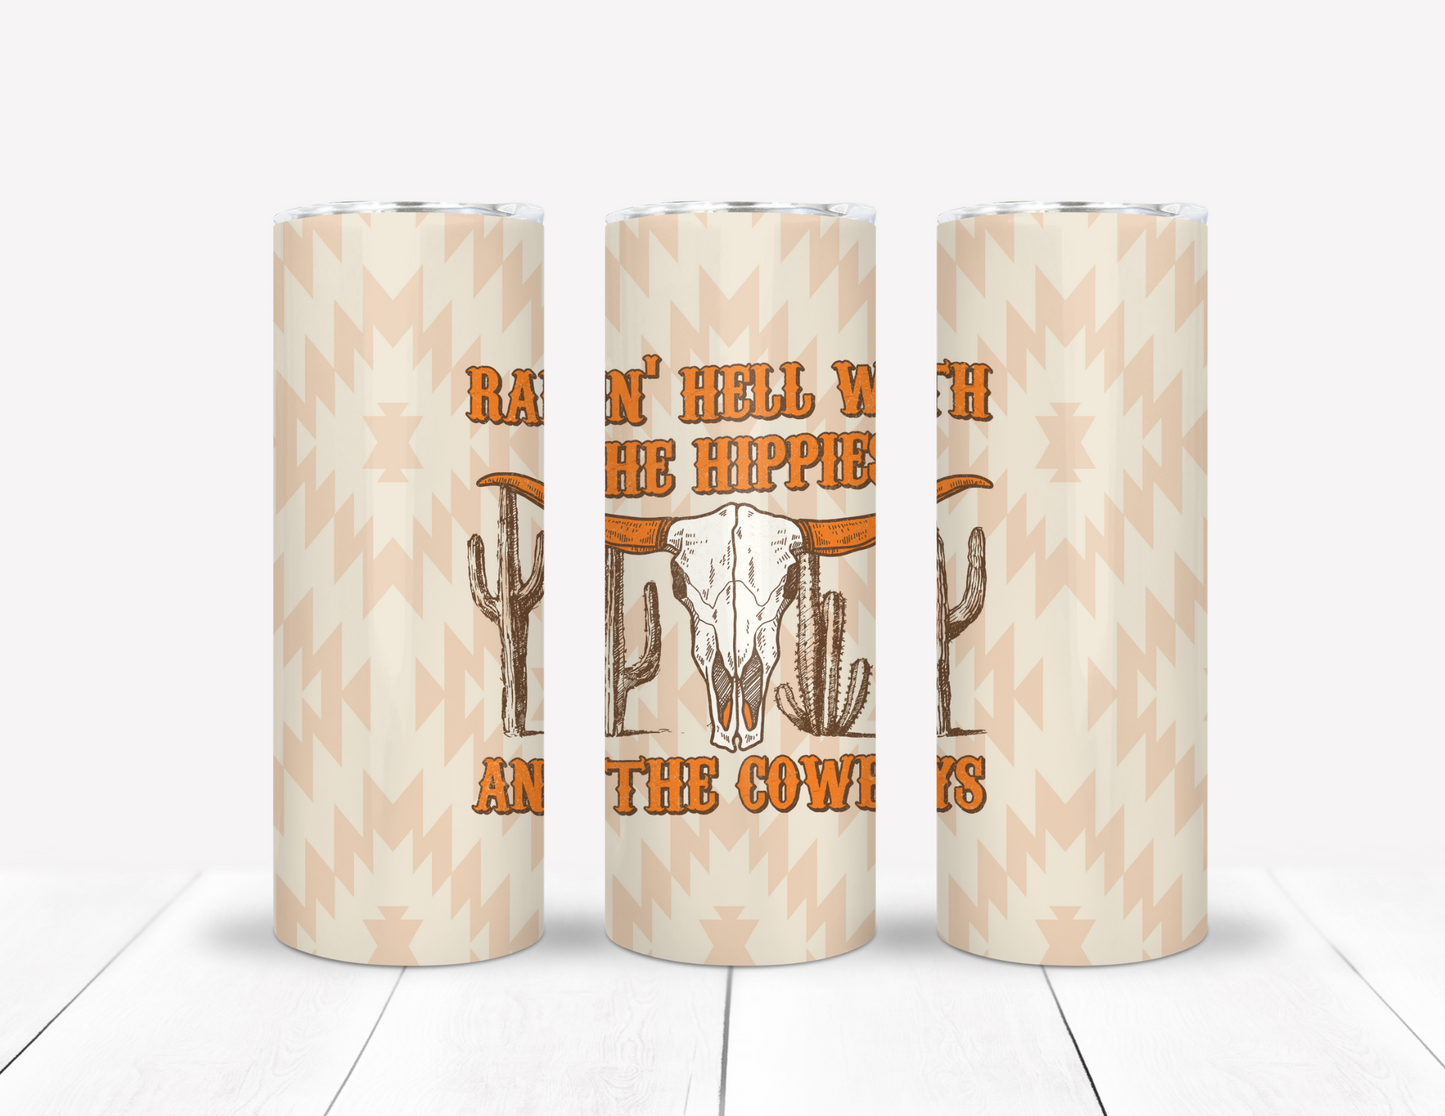 Raisin' Hell With The Hippies & Cowboys Tumbler